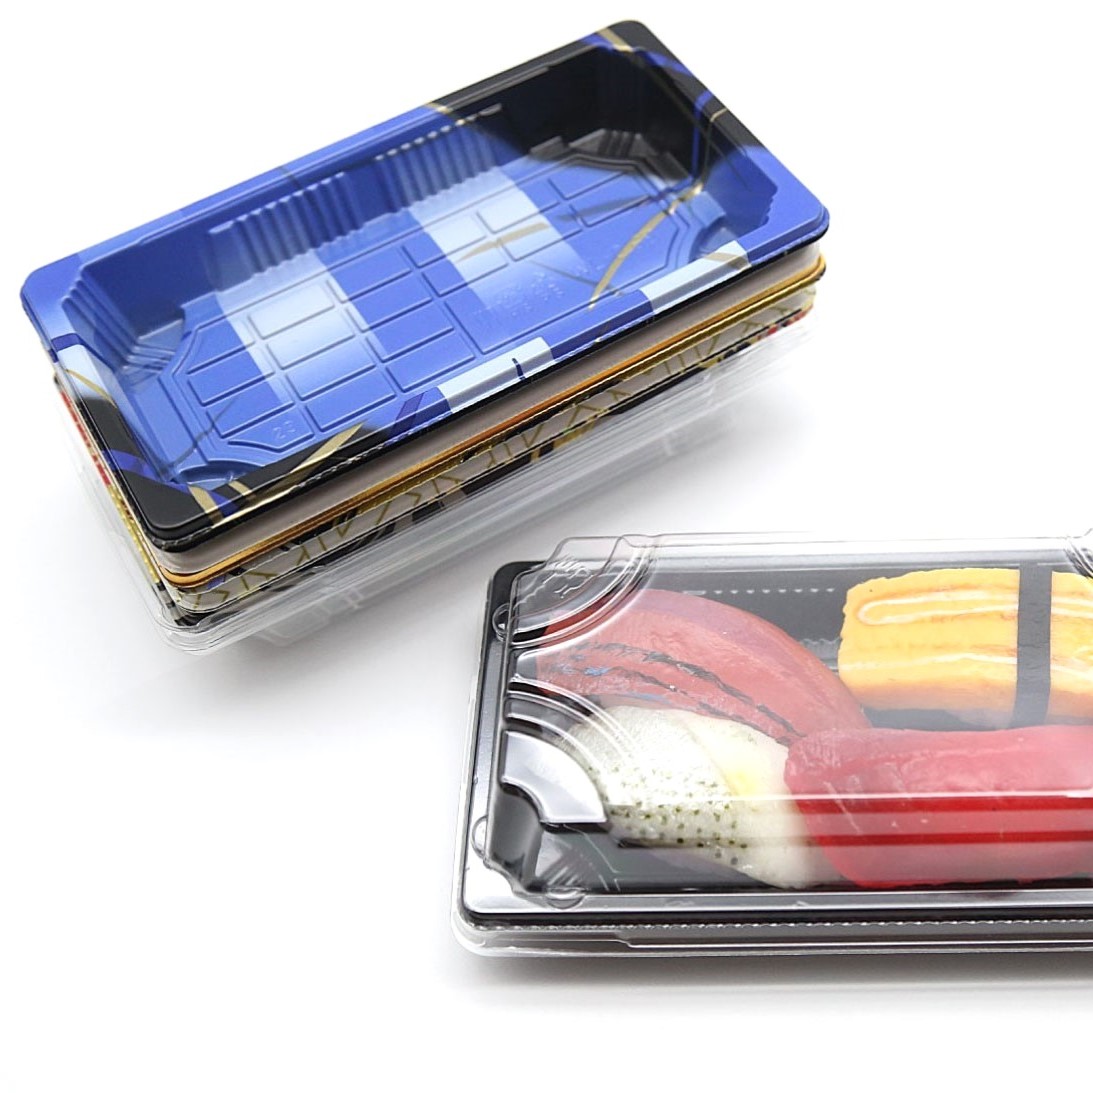 The sushi tray WL-0.6 is stackable for easy storage and placement.